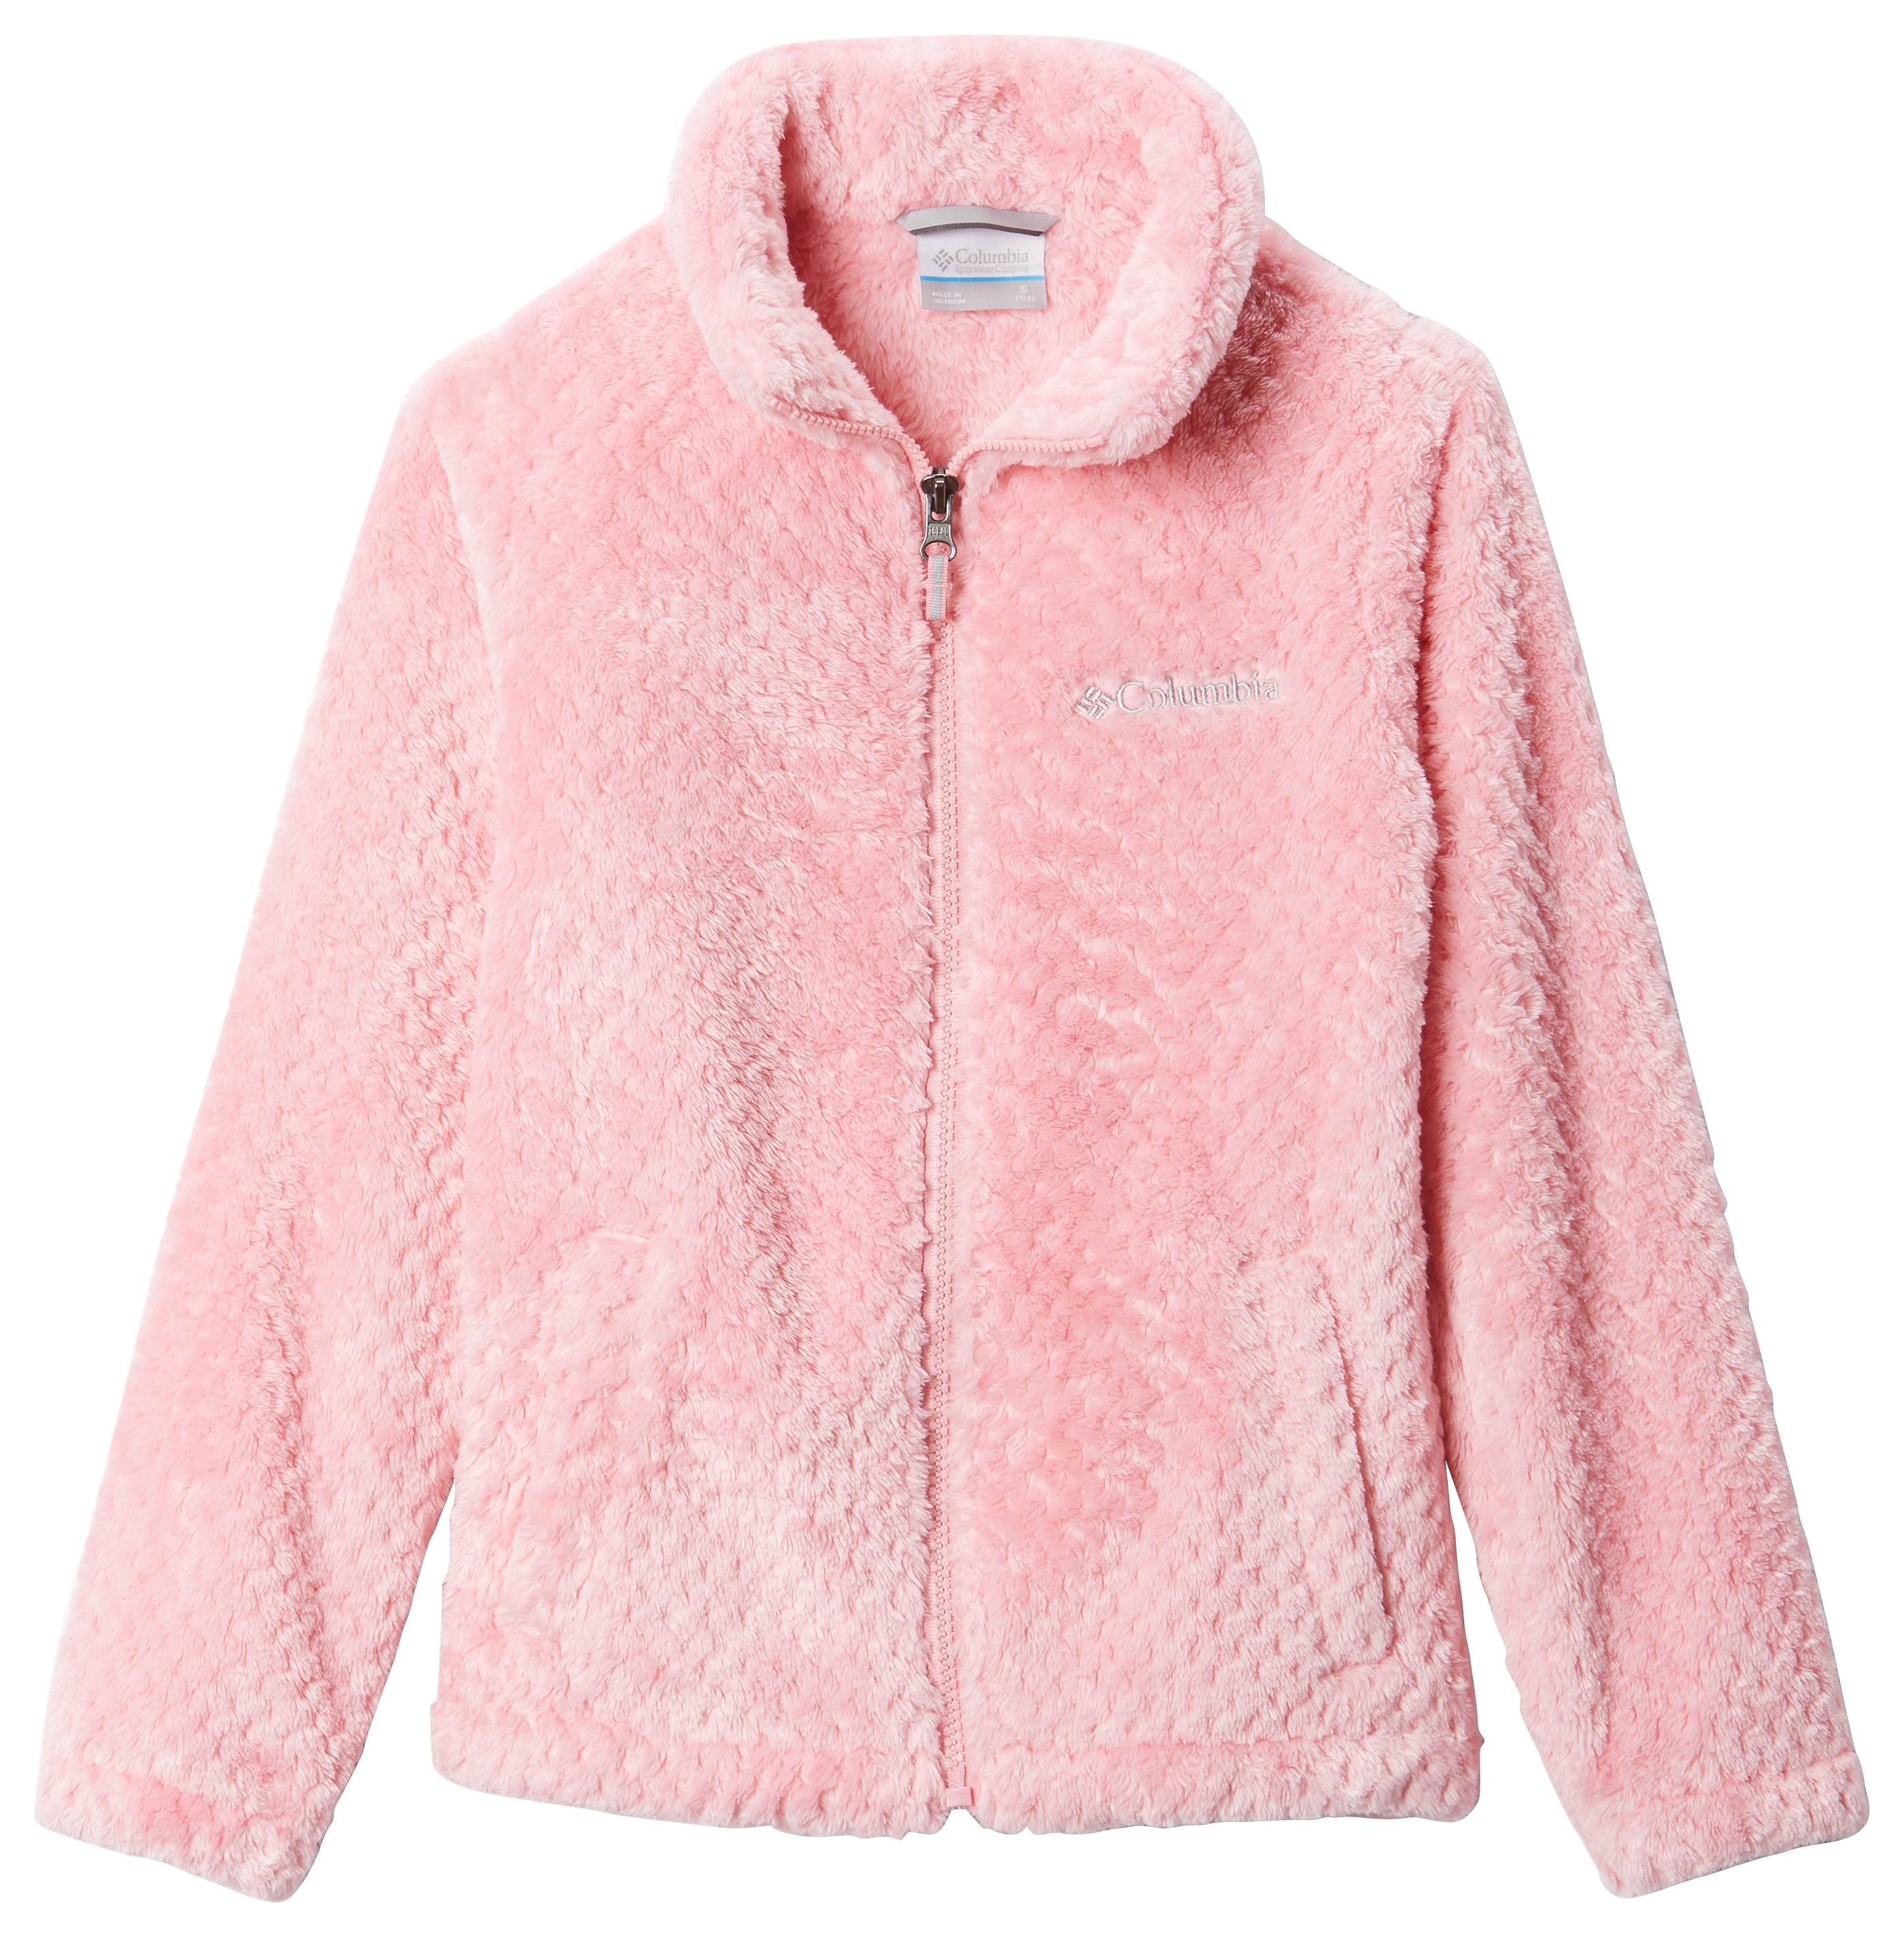 Columbia Fire Side Sherpa Toddlers Kids Jacket Full-Zip or Pro for | Shops Bass